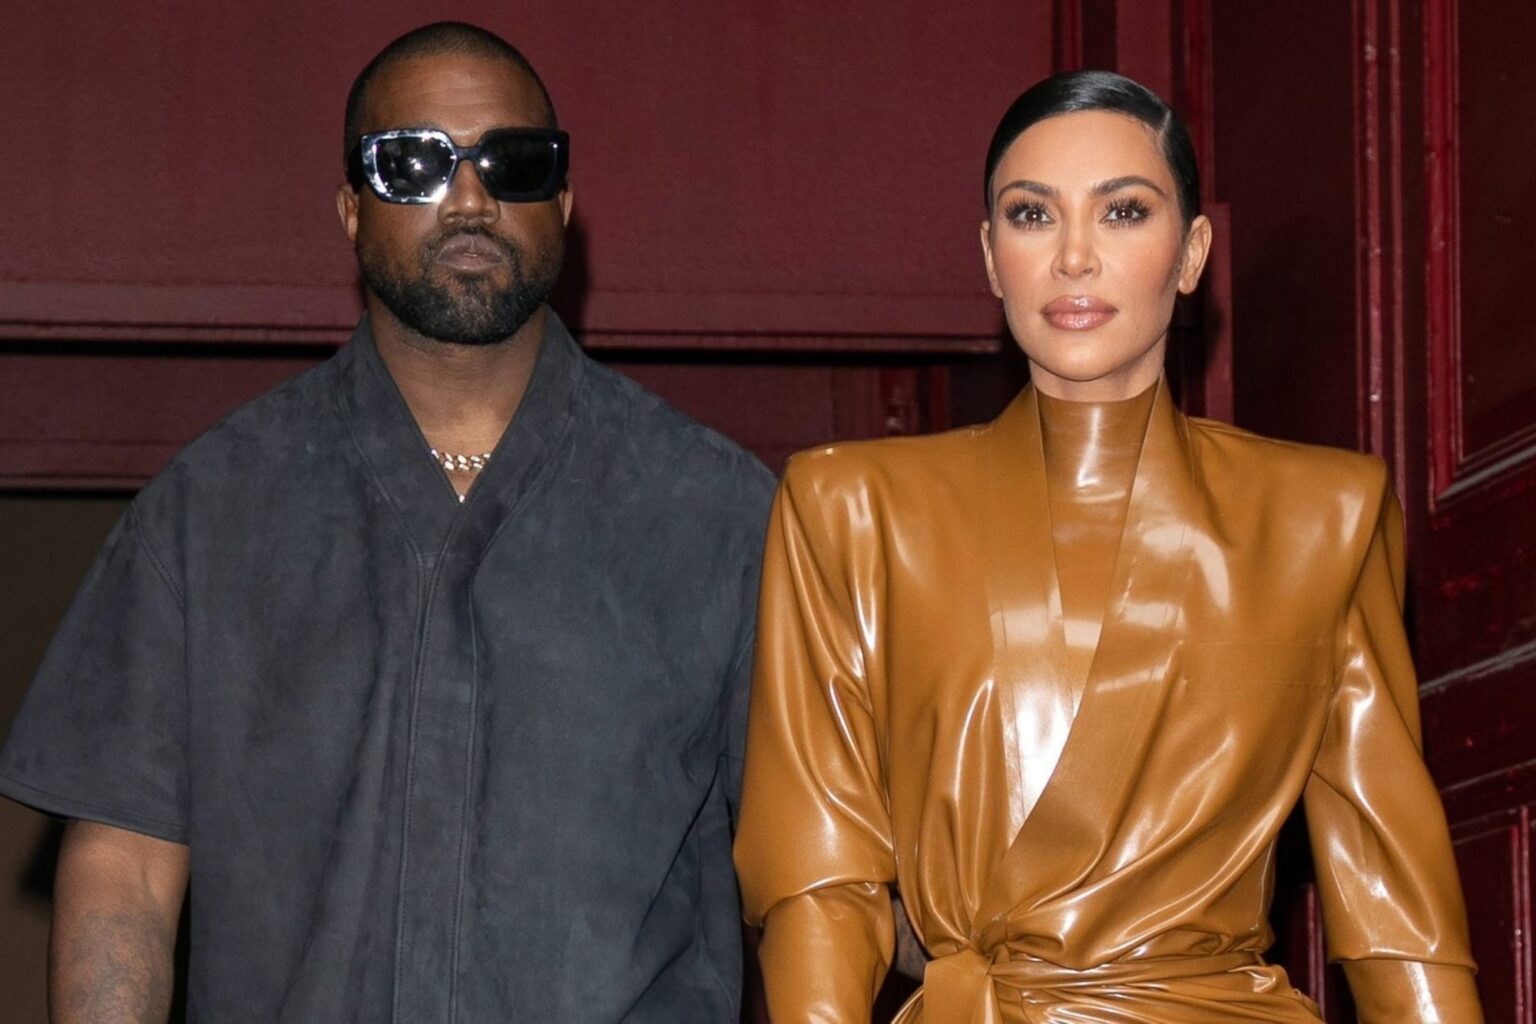 Has Kanye West stopped keeping up with Kim and the Kardashians? Take a look at why the Kardashian West divorce will only make Kanye West stronger!